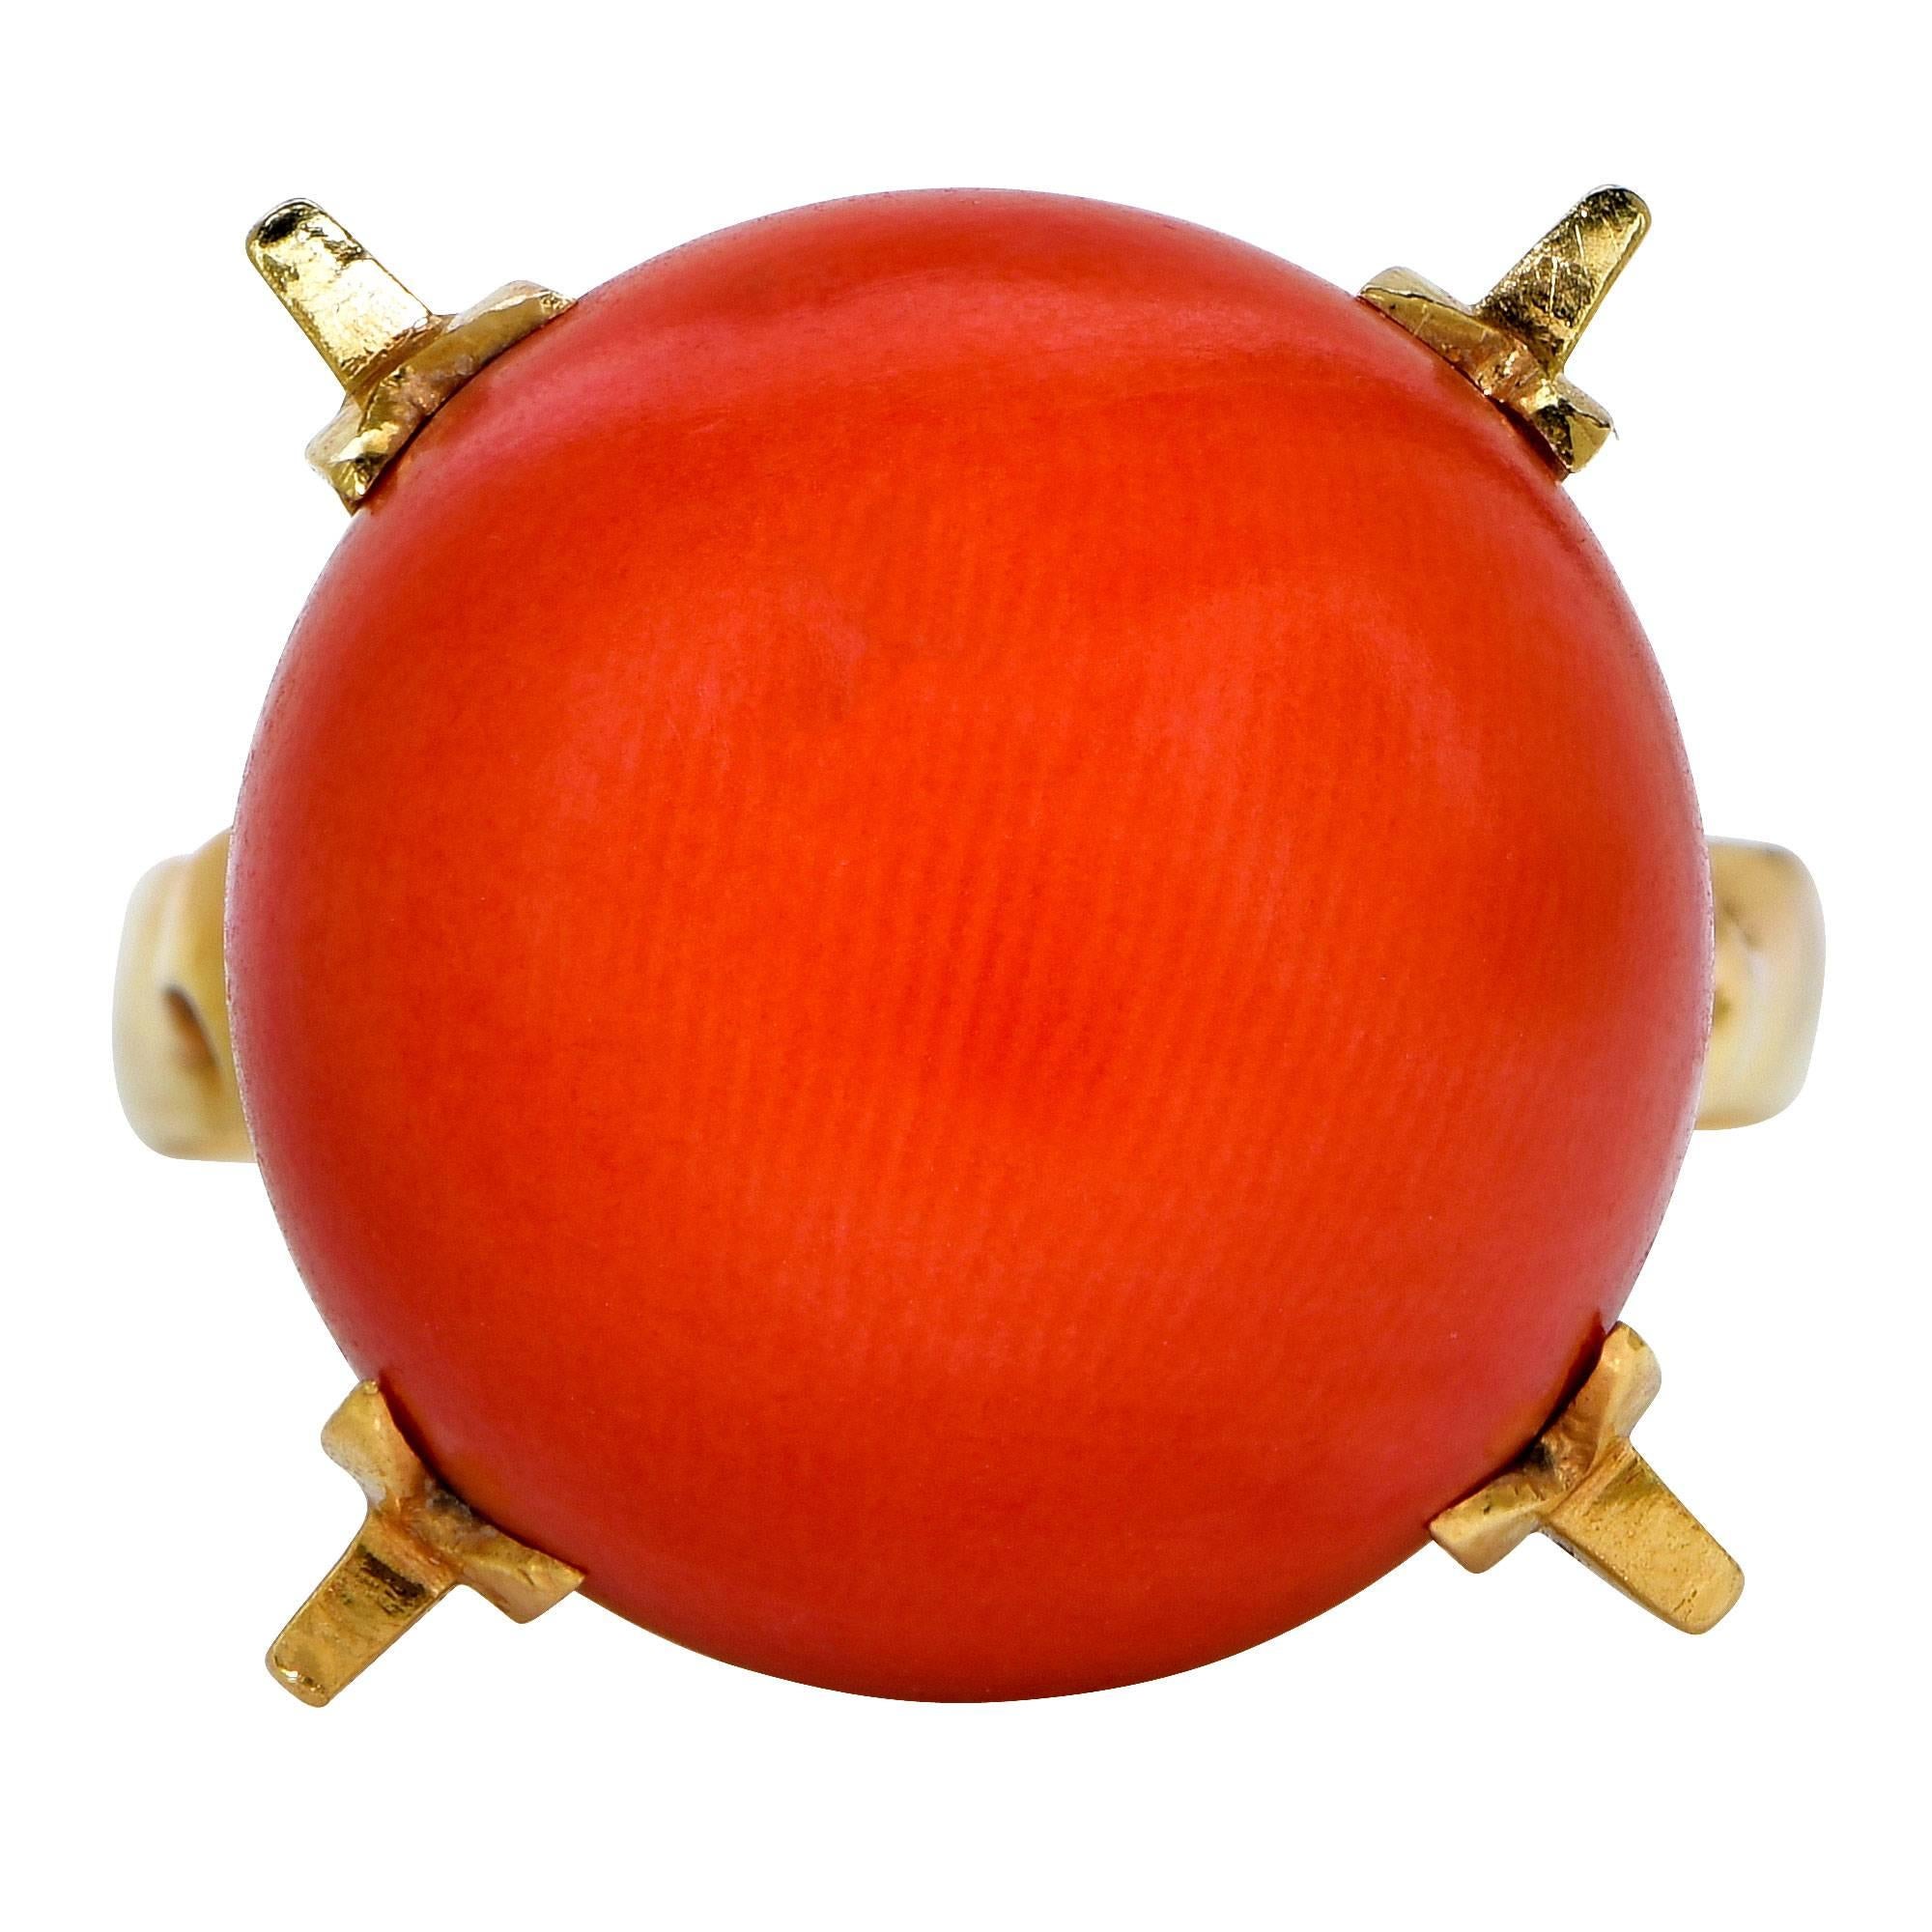 18k yellow gold ring featuring a 15mm round piece of red coral.

Ring size: 6.5

This coral ring is accompanied by a retail appraisal performed by a Graduate Gemologist.